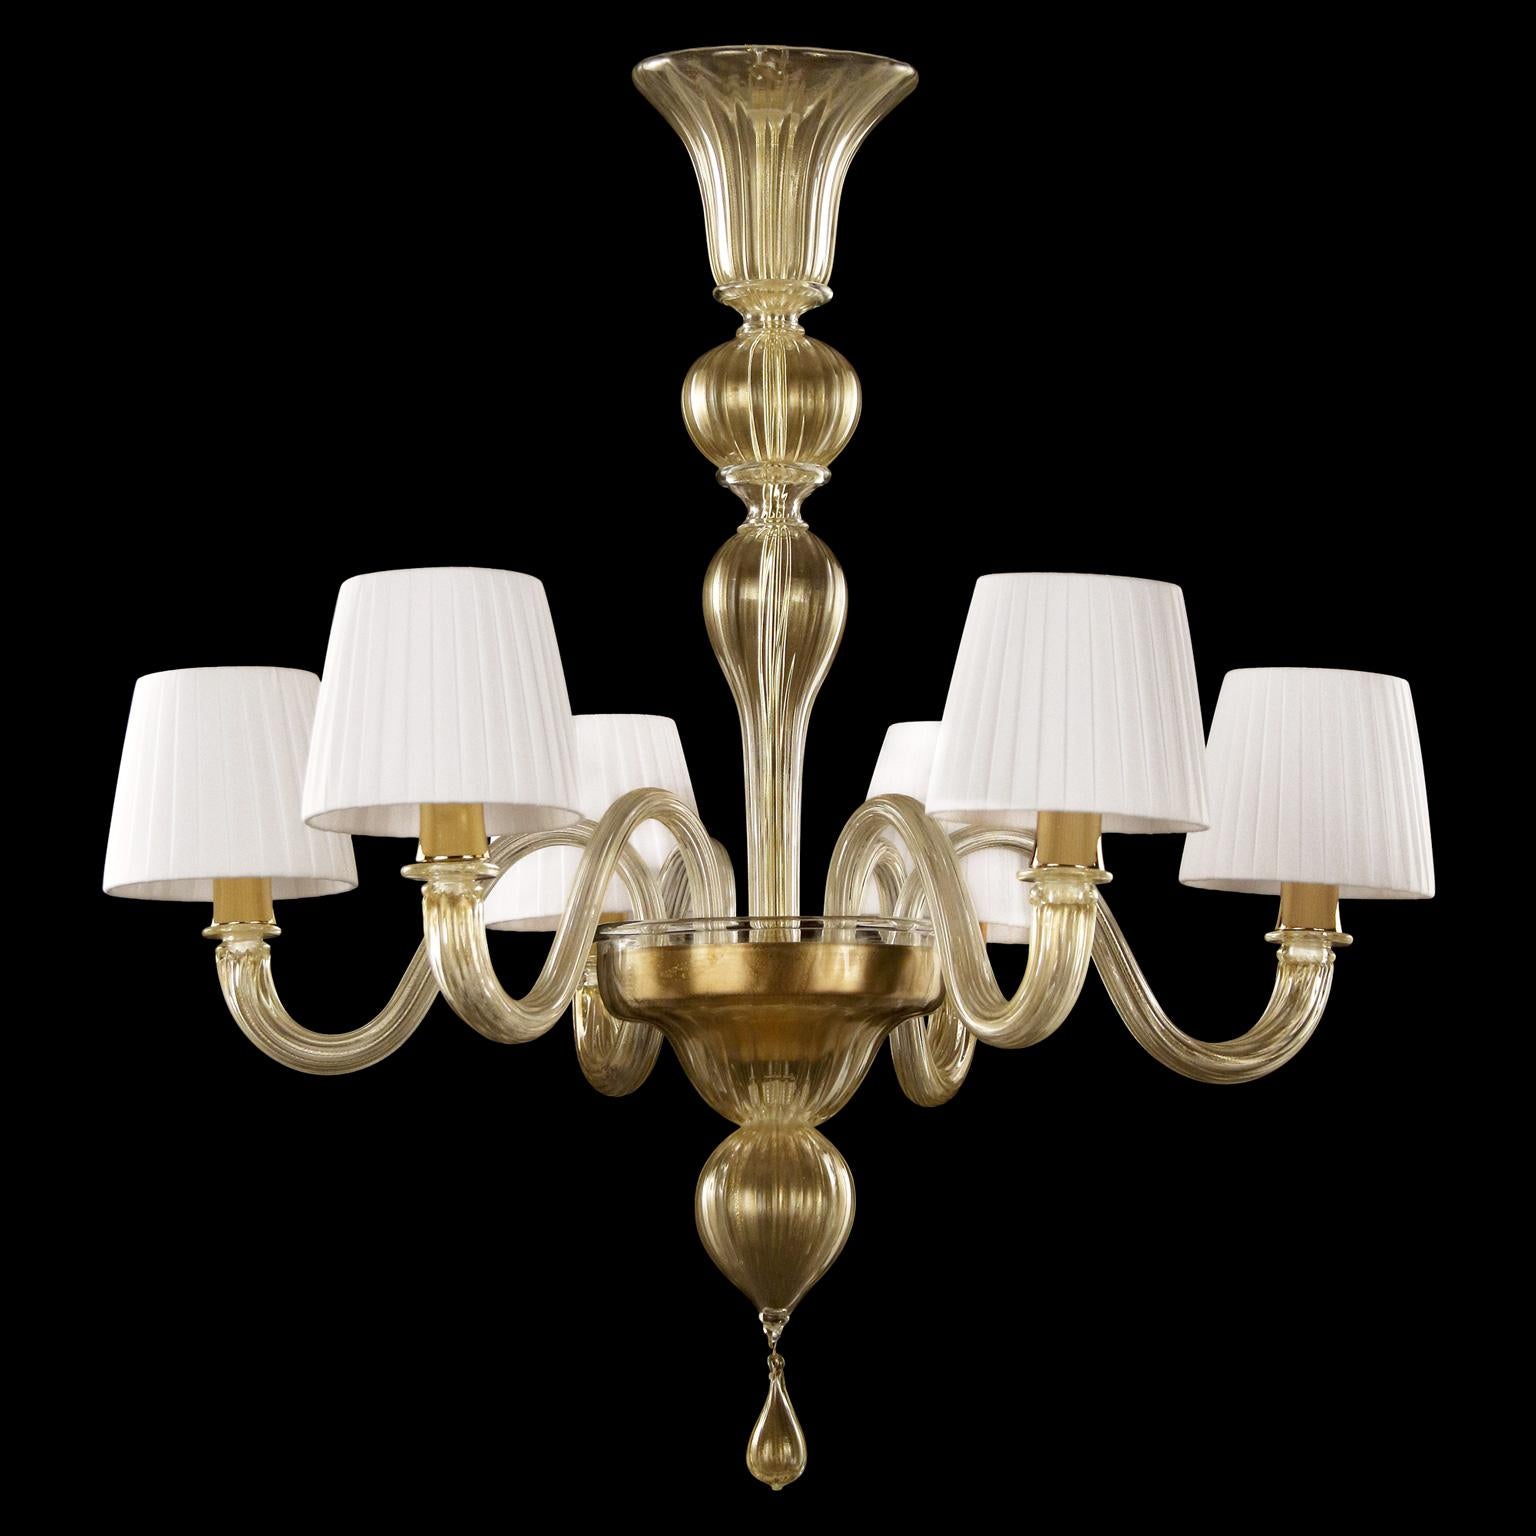 Chapeau chandelier 6-light artistic gold Murano glass, amber organza handmade in Florence lampshades by Multiforme.
 
Chapeau is a Classic and essential chandelier, it is handcrafted using high quality materials in Murano glass and handmade cotton